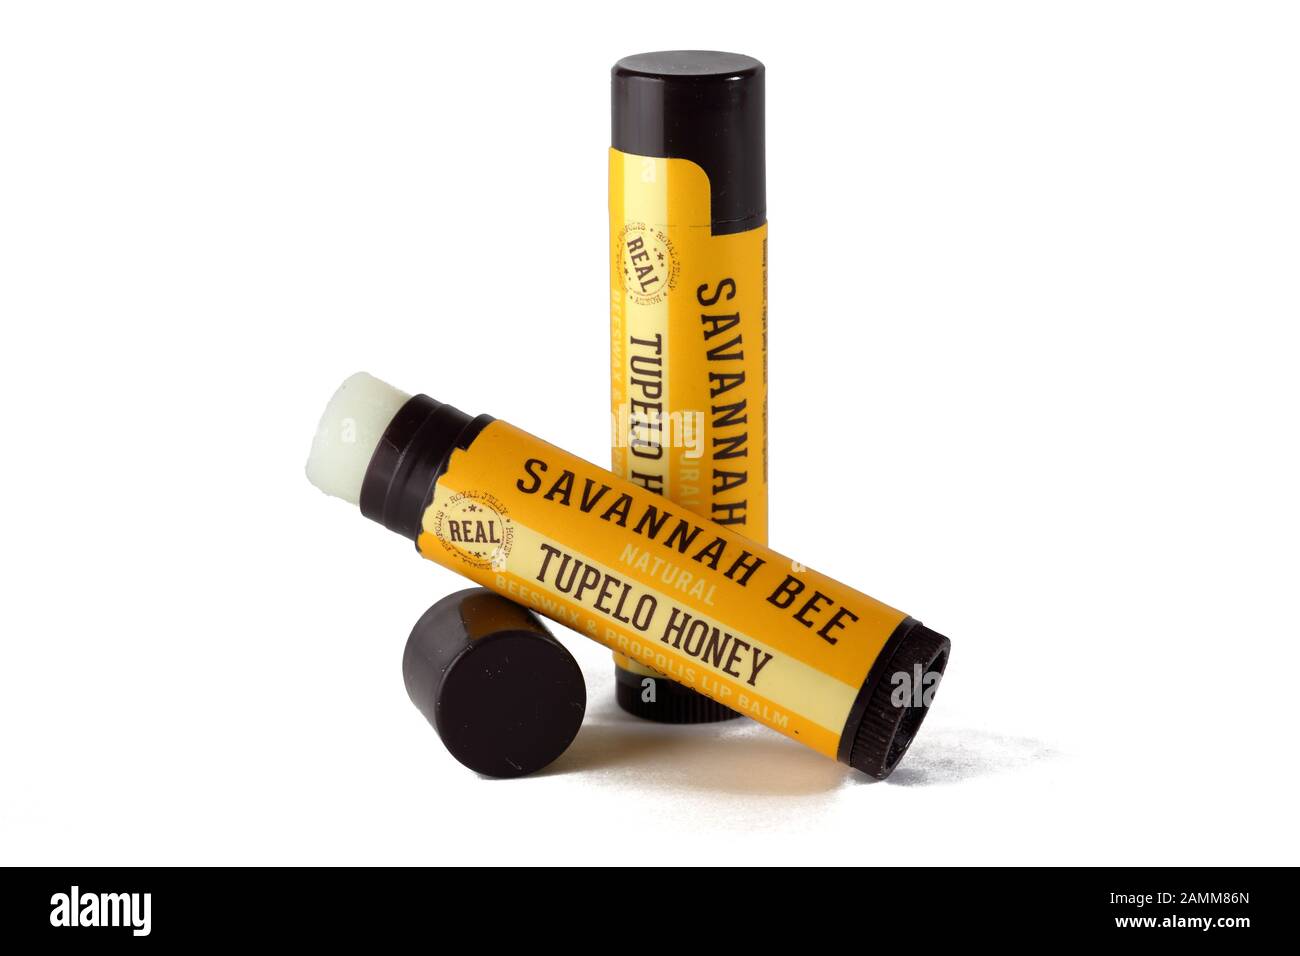 Two sticks of Savannah Bee brand Tupelo Honey lip balm isolated on a white background. cutout image for illustration and editorial use. Stock Photo